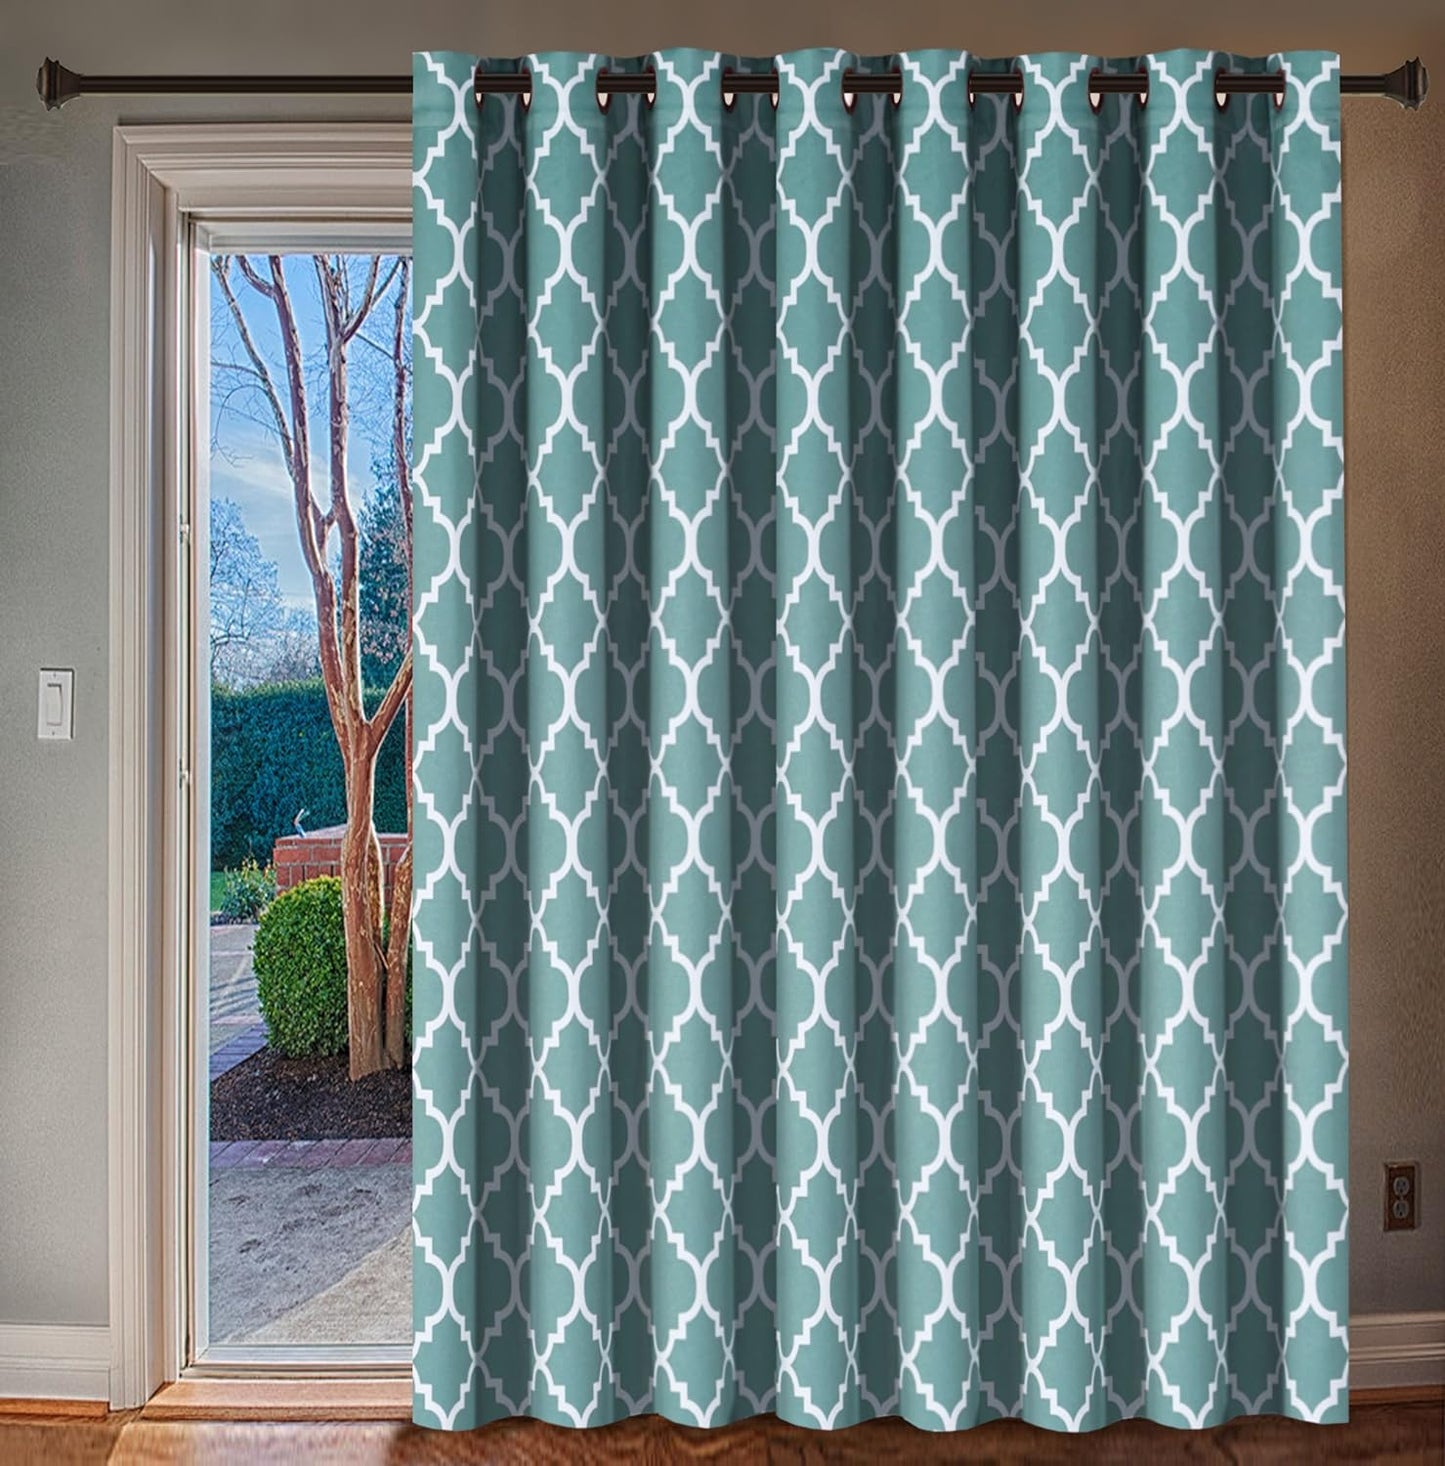 H.VERSAILTEX Extra Wide Blackout Curtain 100X84 Inches Thermal Insulated Curtain for Sliding Glass Door -Grommet Top Patio Door Curtain - Moroccan Tile Quatrefoil Pattern, Dove and White  H.VERSAILTEX Teal  White 100"W X 96"L 